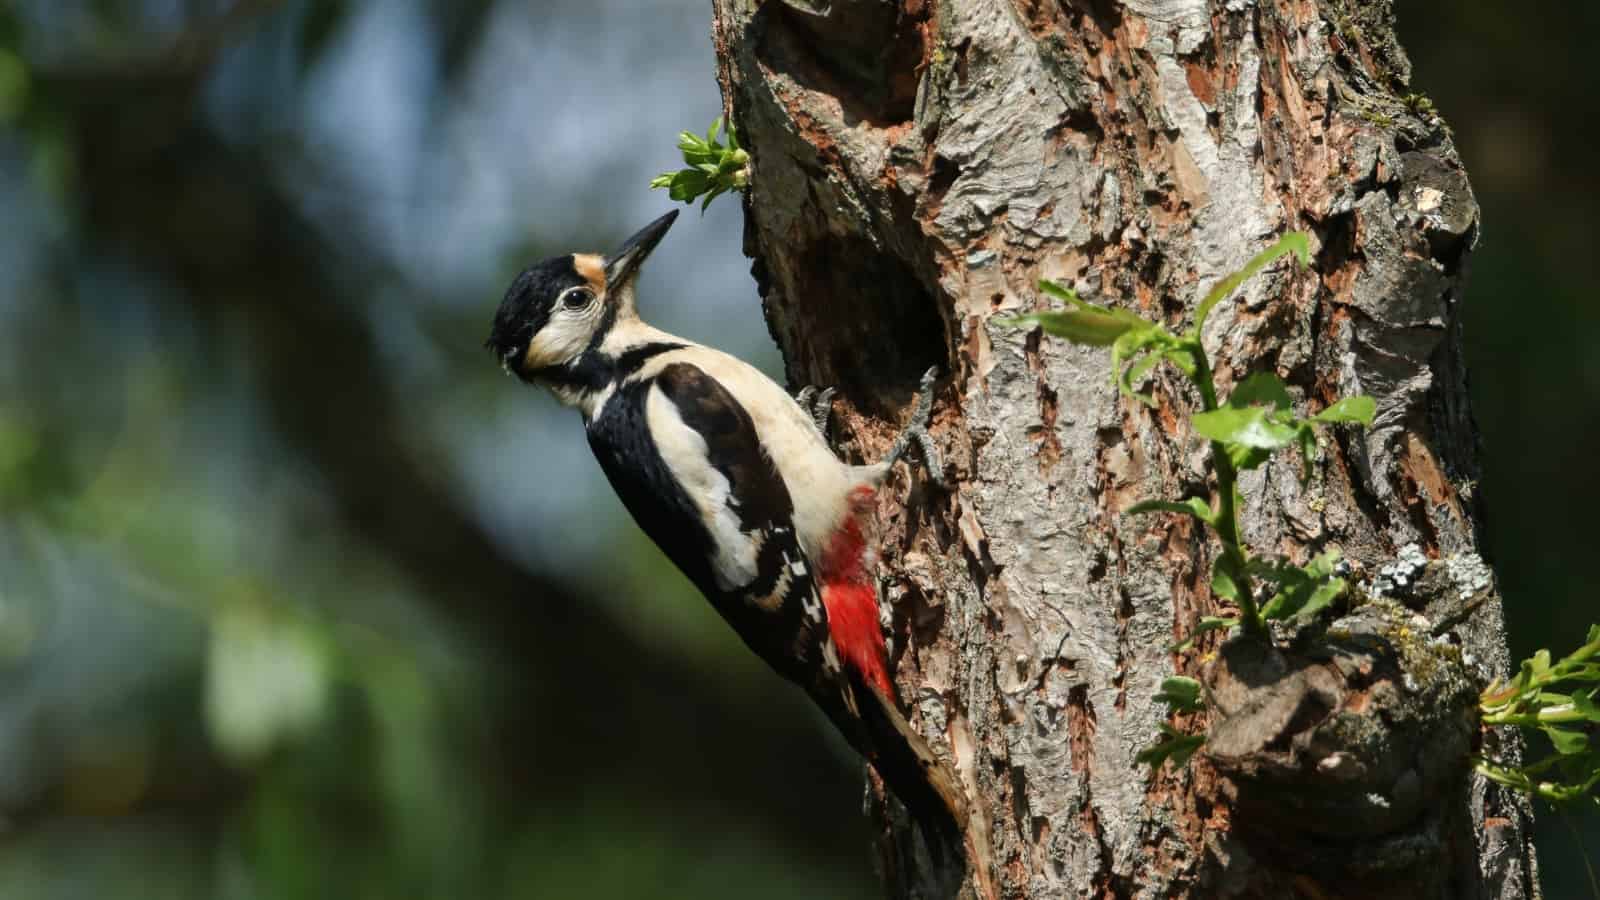 How to Attract Woodpeckers